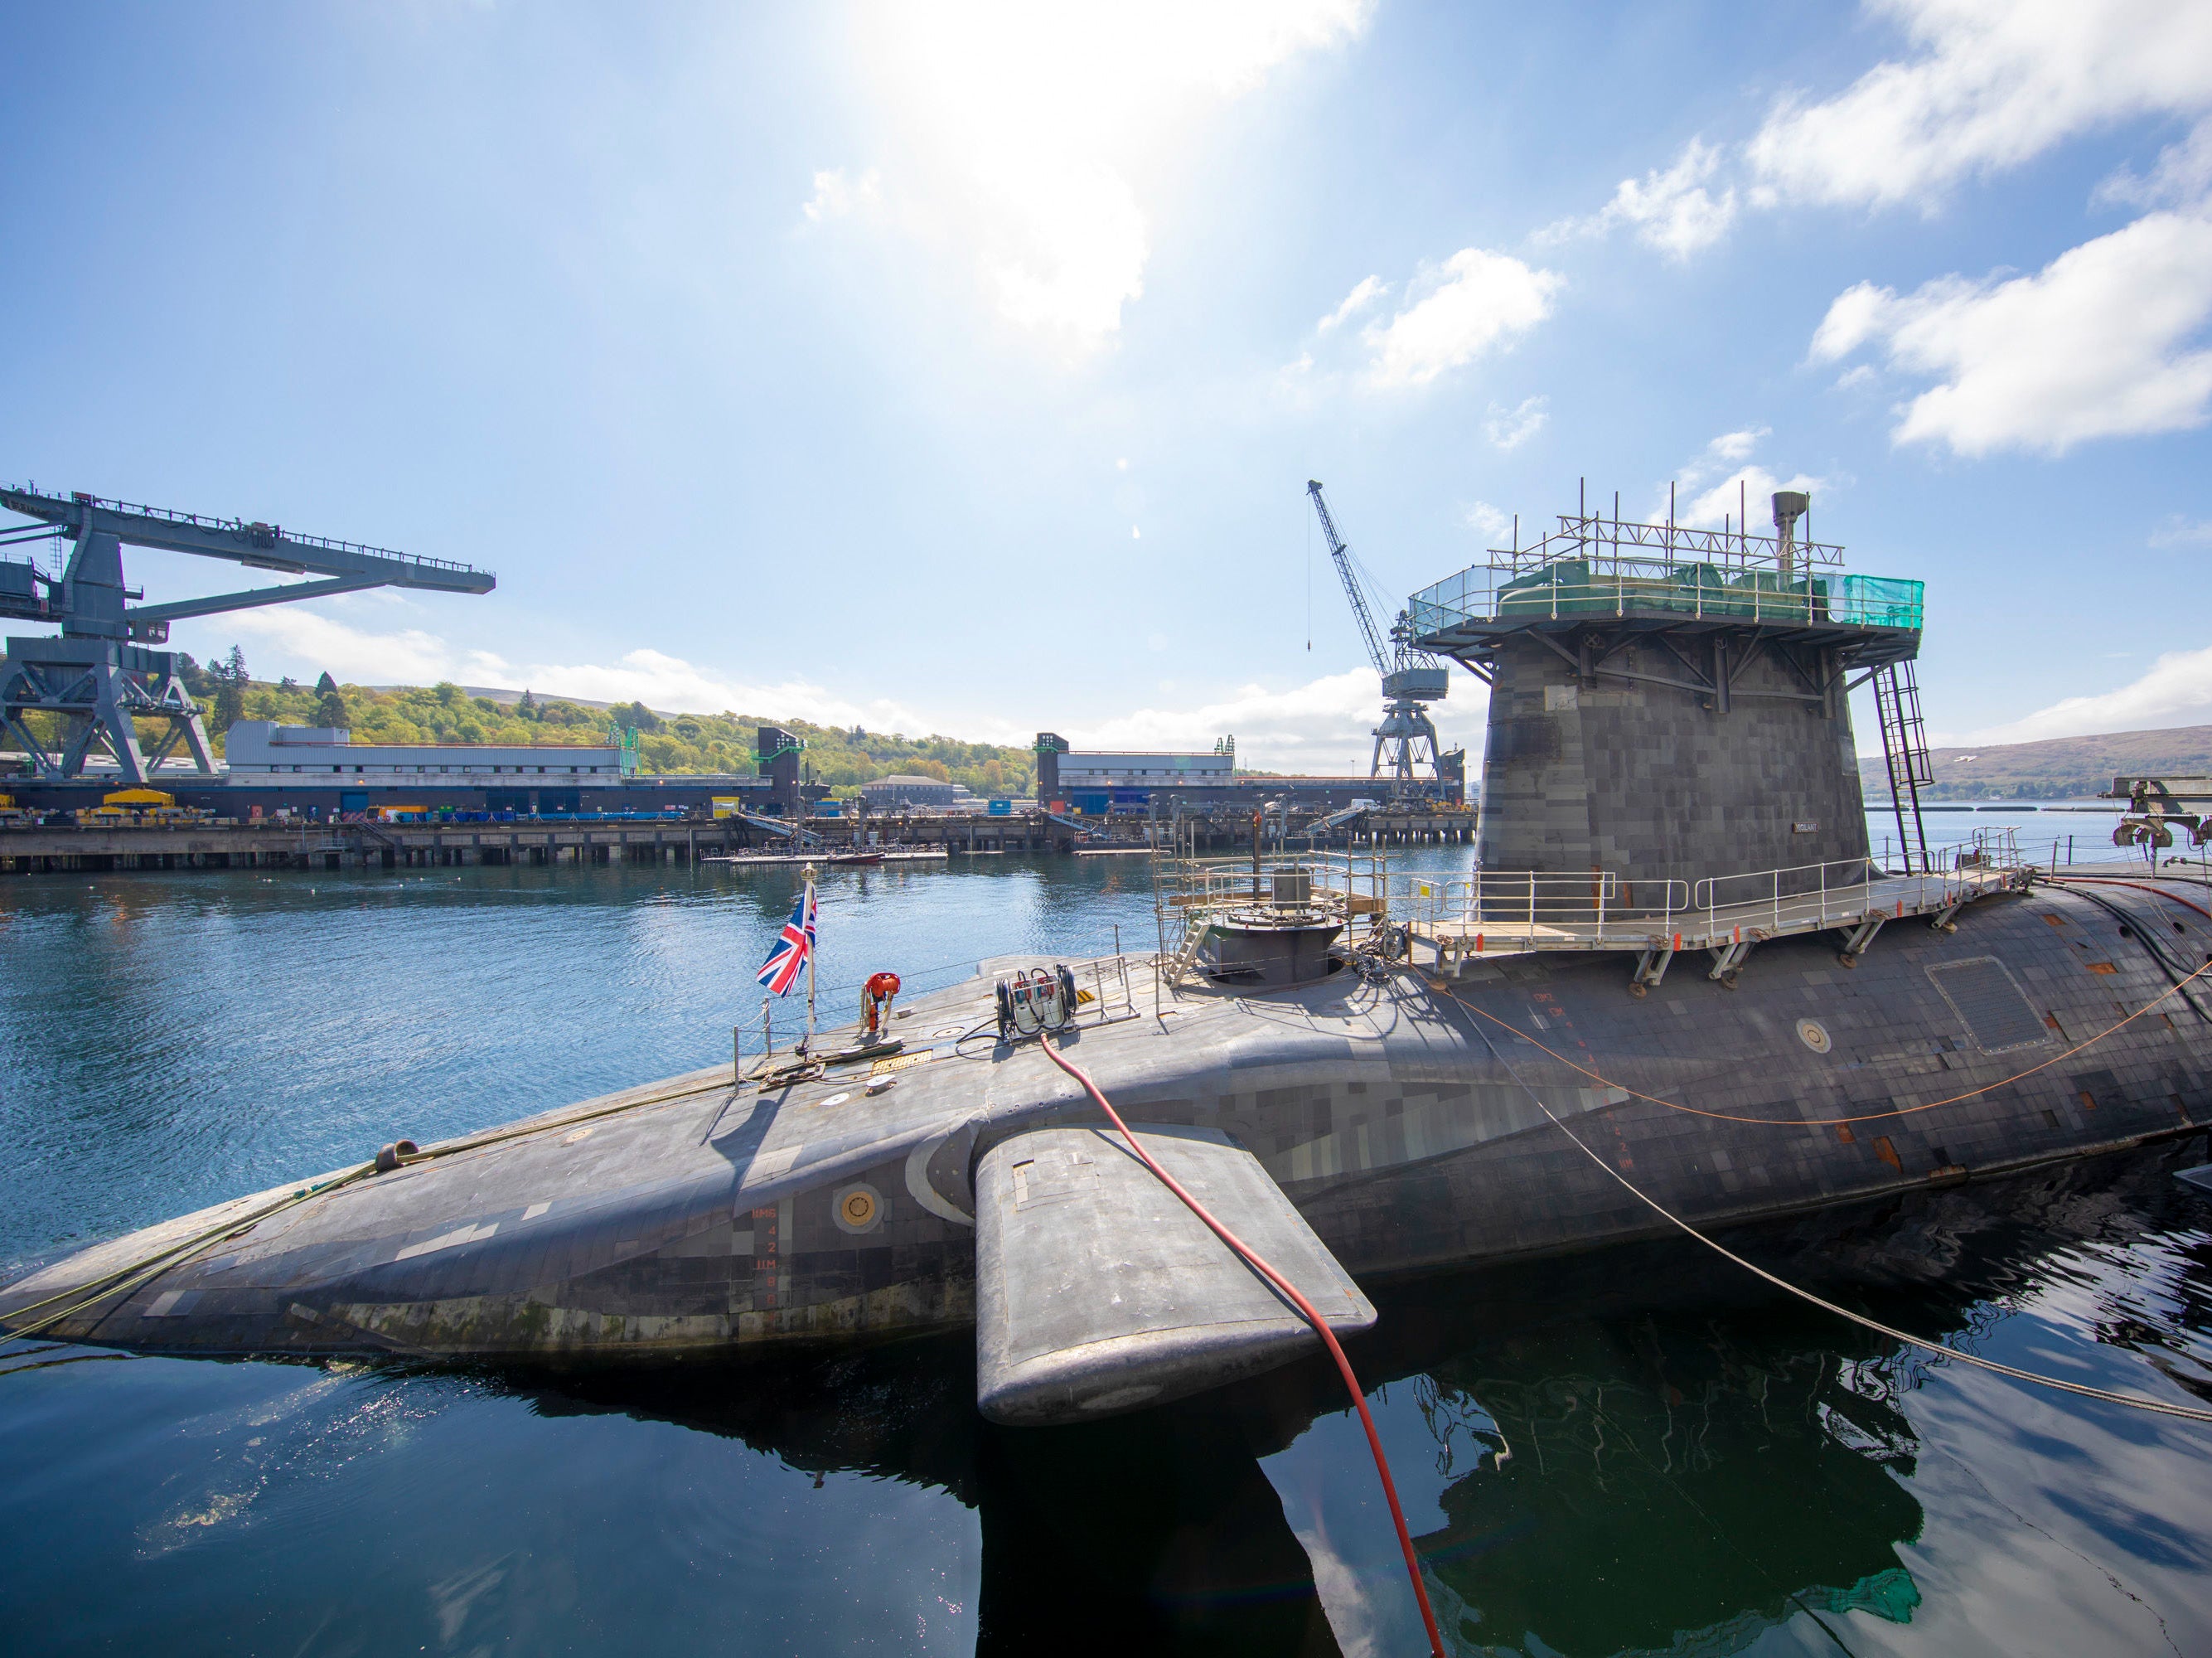 HMS Vigilant at Faslane naval base, which carries the UK’s Trident nuclear deterrent